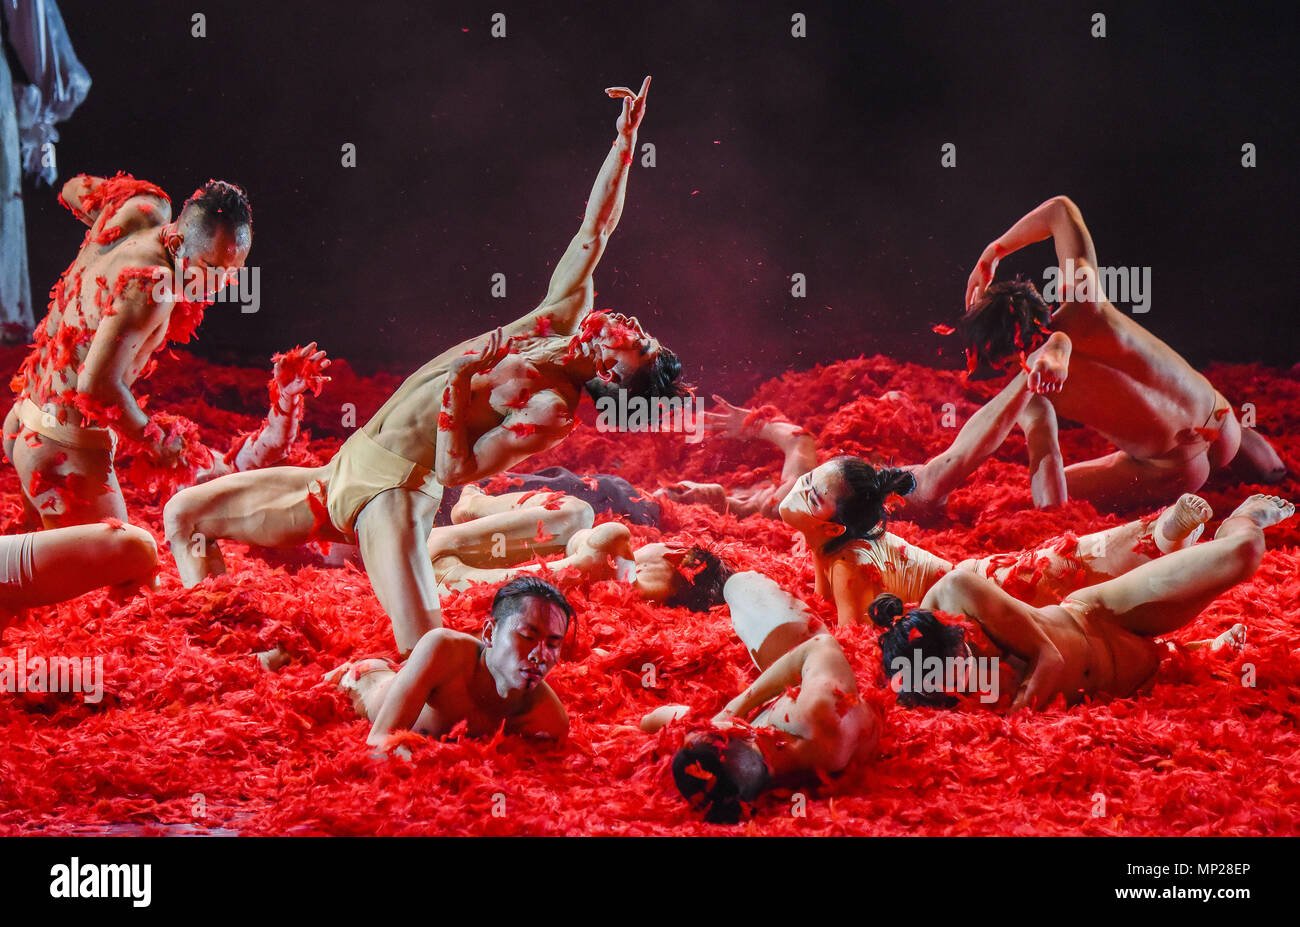 May 18, 2018 - Nanning, Nanning, China - Nanning, CHINA-18th May 2018: Dancers perform 'House of Flying Daggers' choreographed by Yang Liping in Nanning, southwest China's Guangxi, May 18th, 2018. Yang Liping is the director, choreographer and star of a performance art show called ''Dynamic Yunnan'' that has drawn sellout crowds all over China. She toured Europe and the United States in 2005. Between 2004 and 2008, Yang Liping directed and choreographed a trilogy: ''Dynamic Yunnan'', ''Echoes of Shangri-la'' and ''Tibetan Myth''. In 2004, ''Dynamic Yunnan'' won five major awards at the Nationa Stock Photo